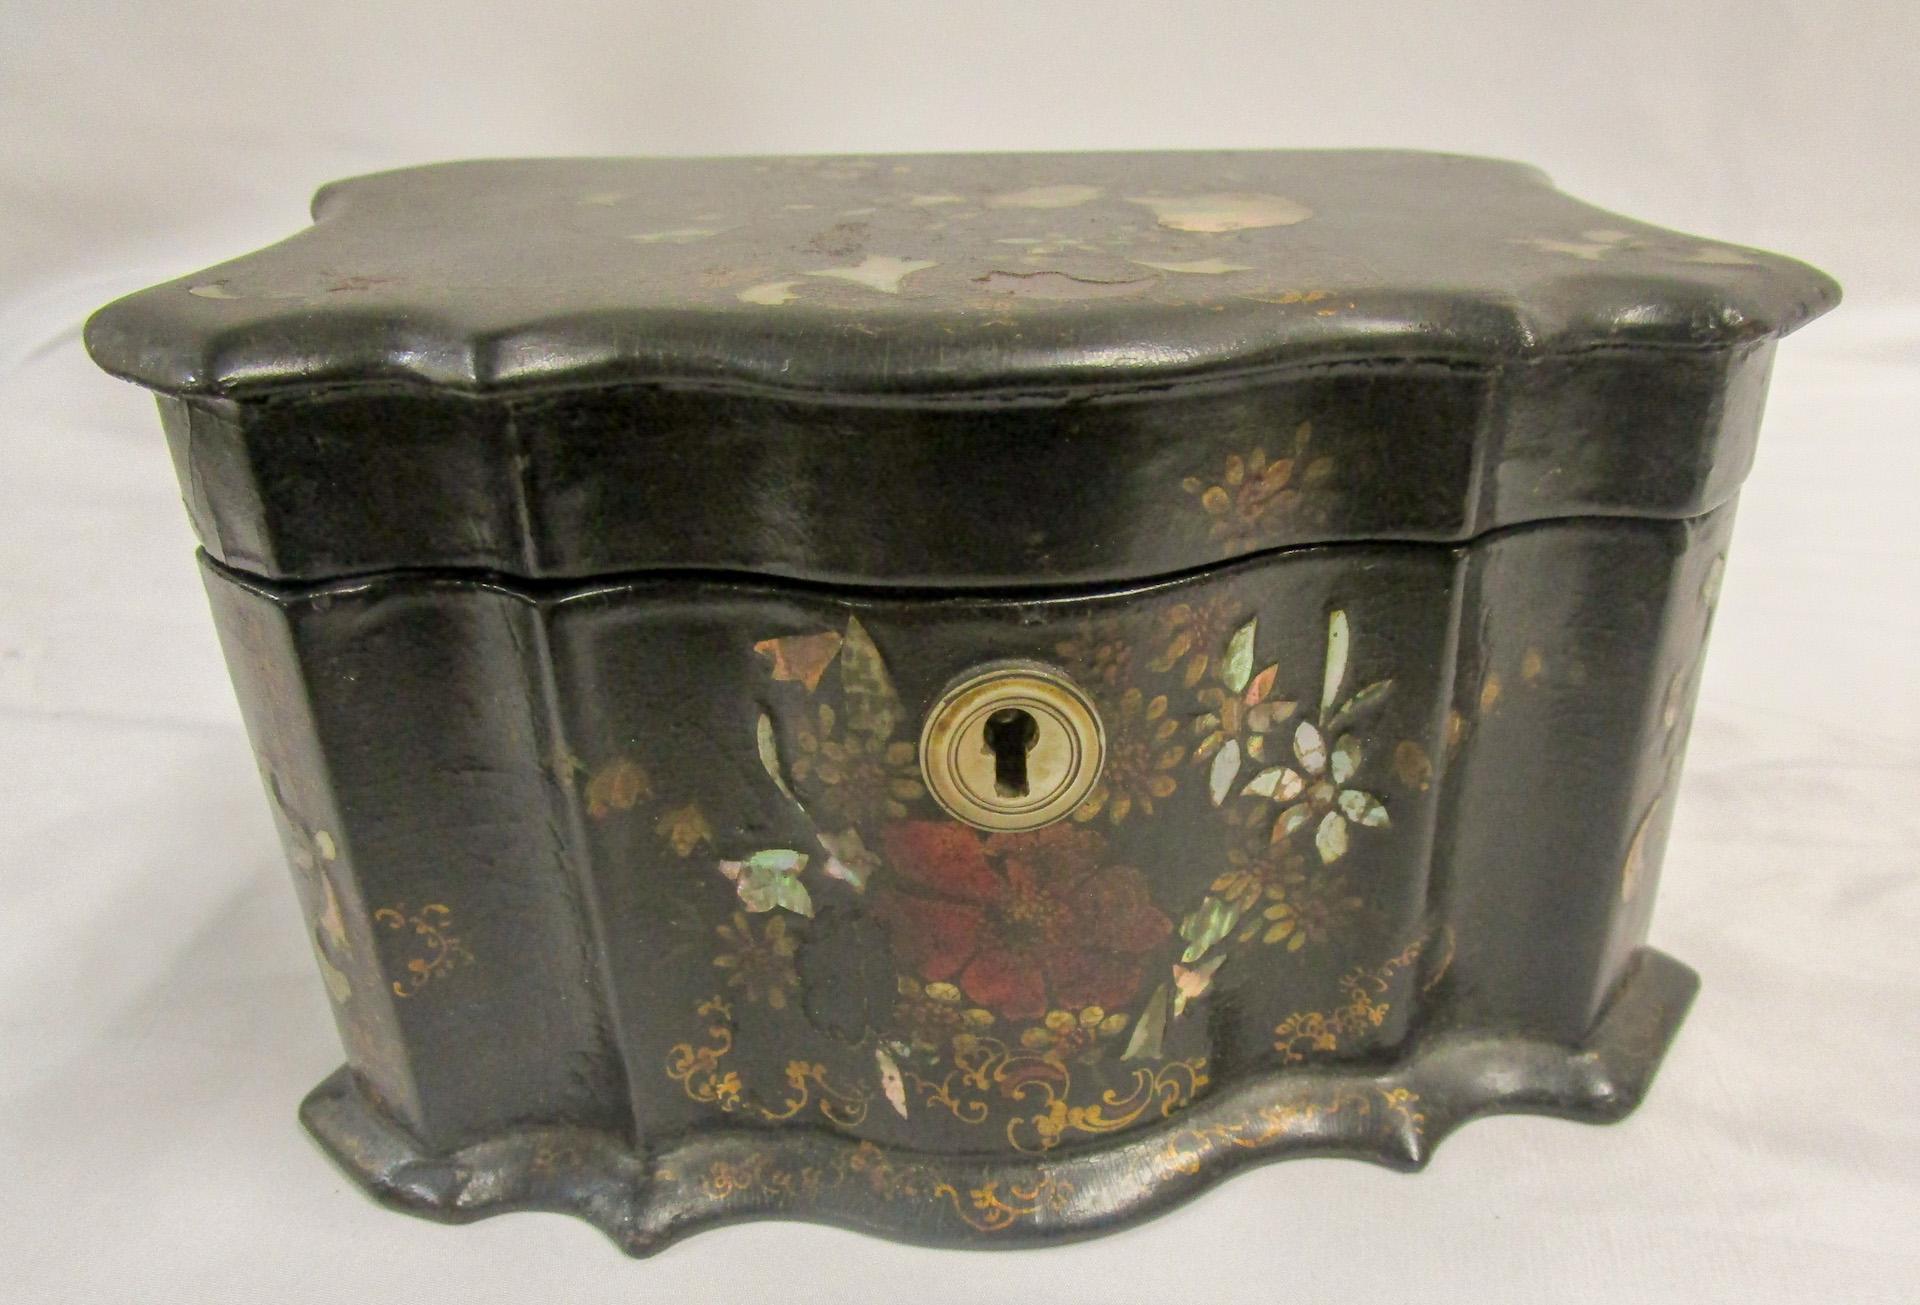 This ornate teacaddy is most likely a product of the renowned English company of Jennens and Bettridge (a partnership between A. Jennens and J. Bettridge 1815–1864) who were highly regarded for producing quality papier-mâché wares. There is a lot of